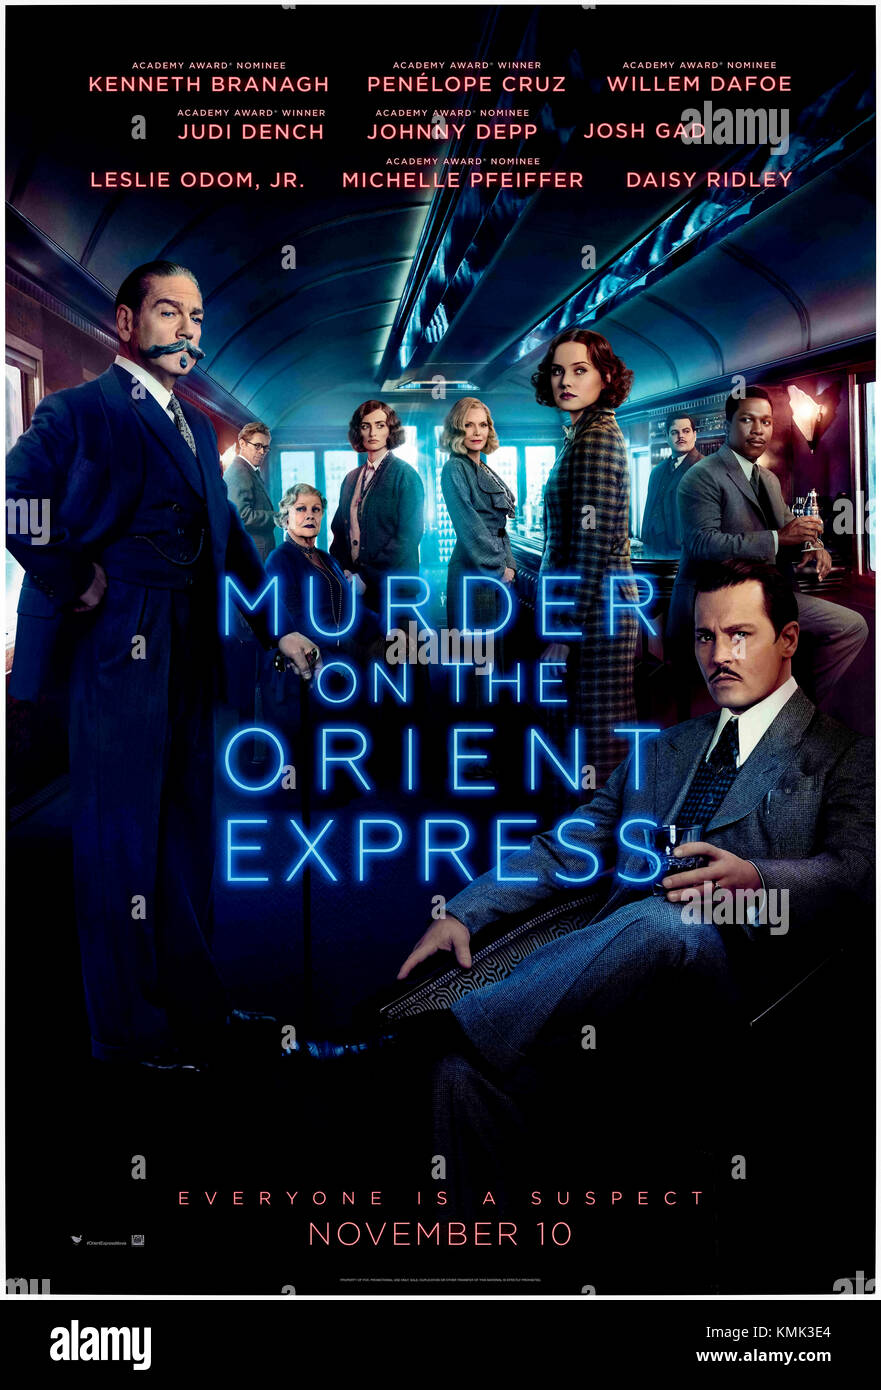 Murder on the Orient Express (2017) directed by Kenneth Branagh and starring Kenneth Branagh, Penélope Cruz, Willem Dafoe, Judi Dench and Johnny Depp. Hercule Poirot returns to the big screen in a new adaptation of the classic Agatha Christie novel. Stock Photo